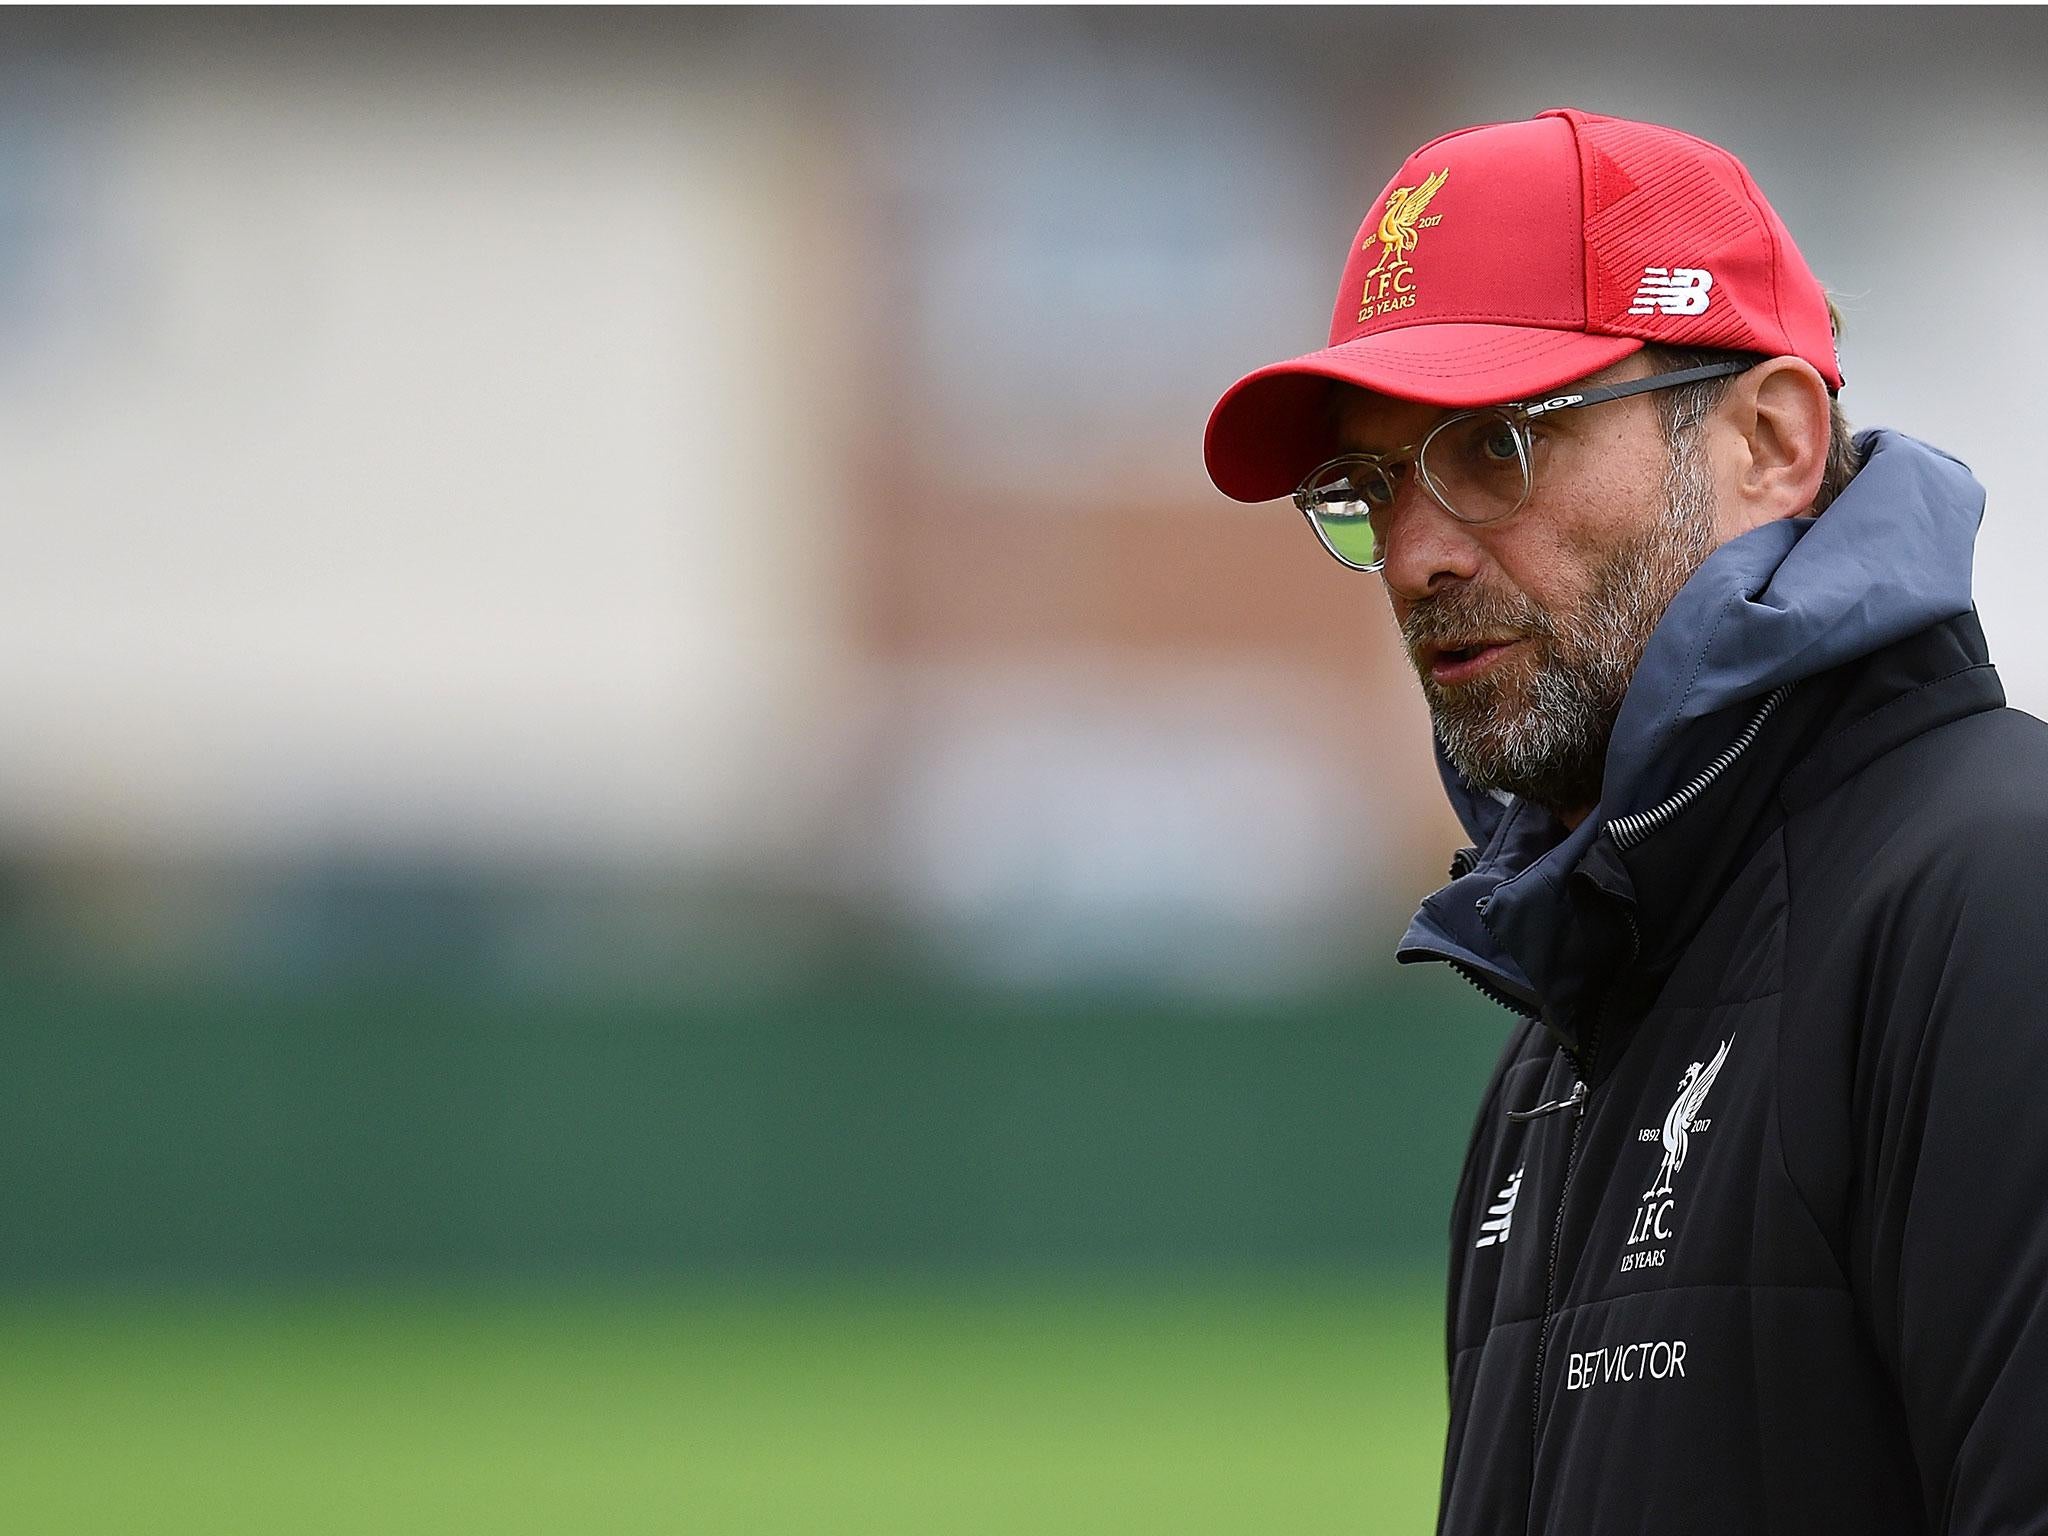 Jurgen Klopp must tighten up his side's backline if they're to challenge for the title